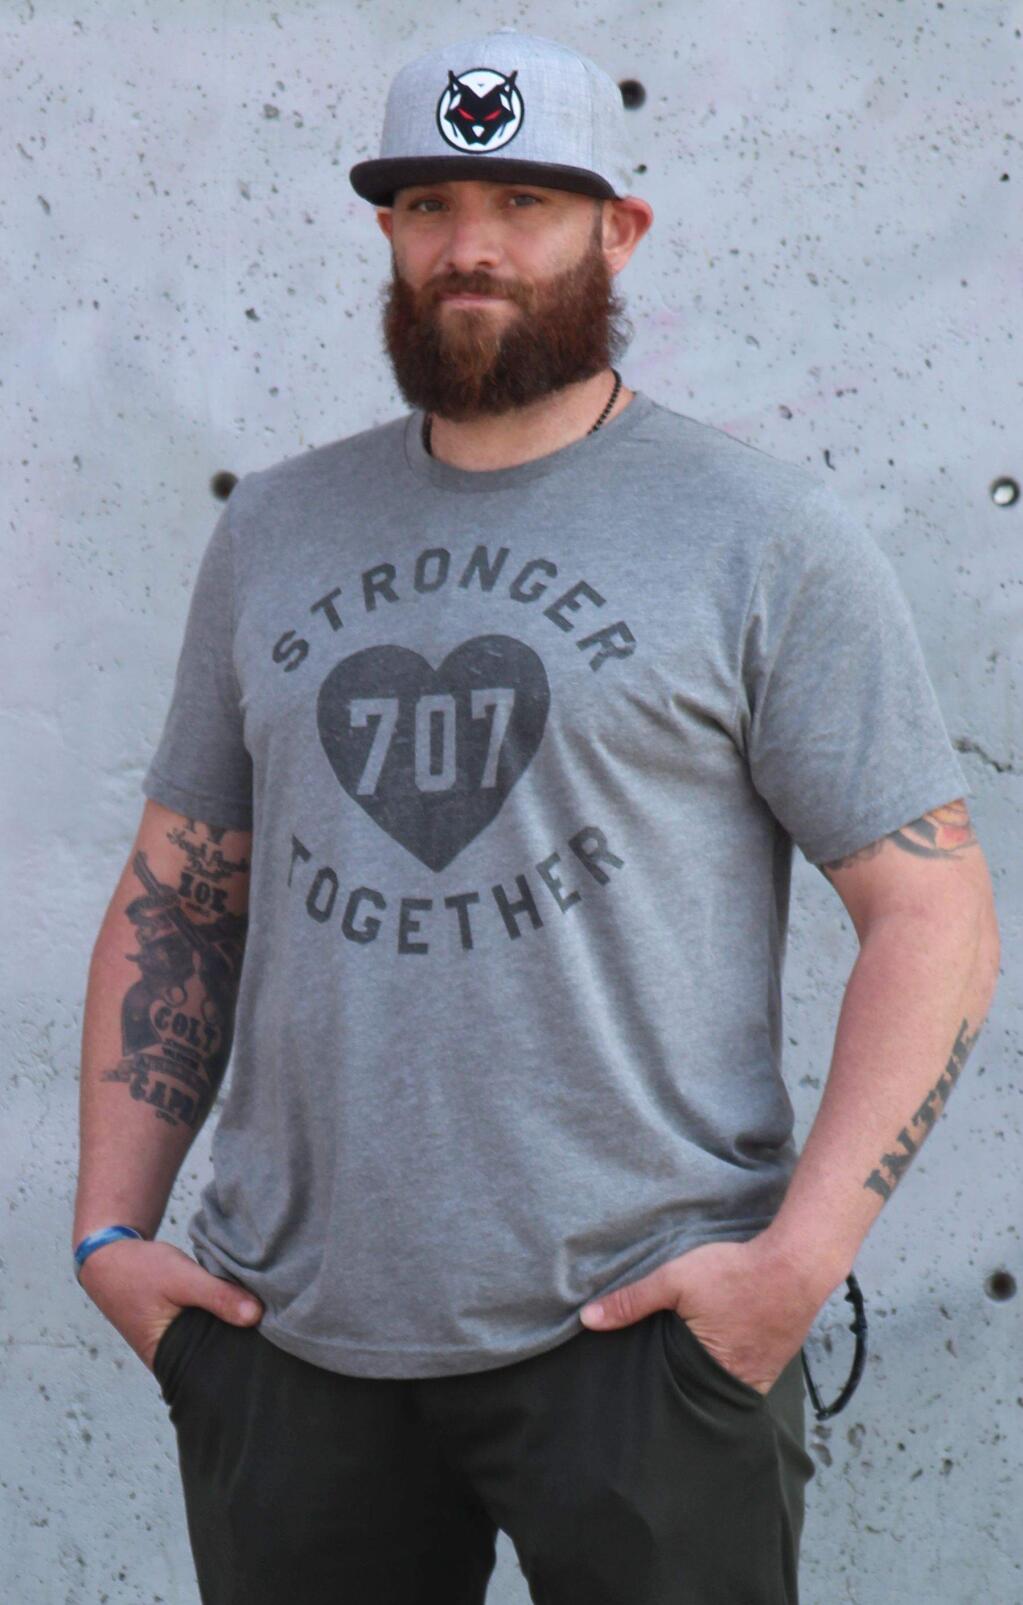 Jonny Gomes wearing one of his '707 Stronger Together' shirts.